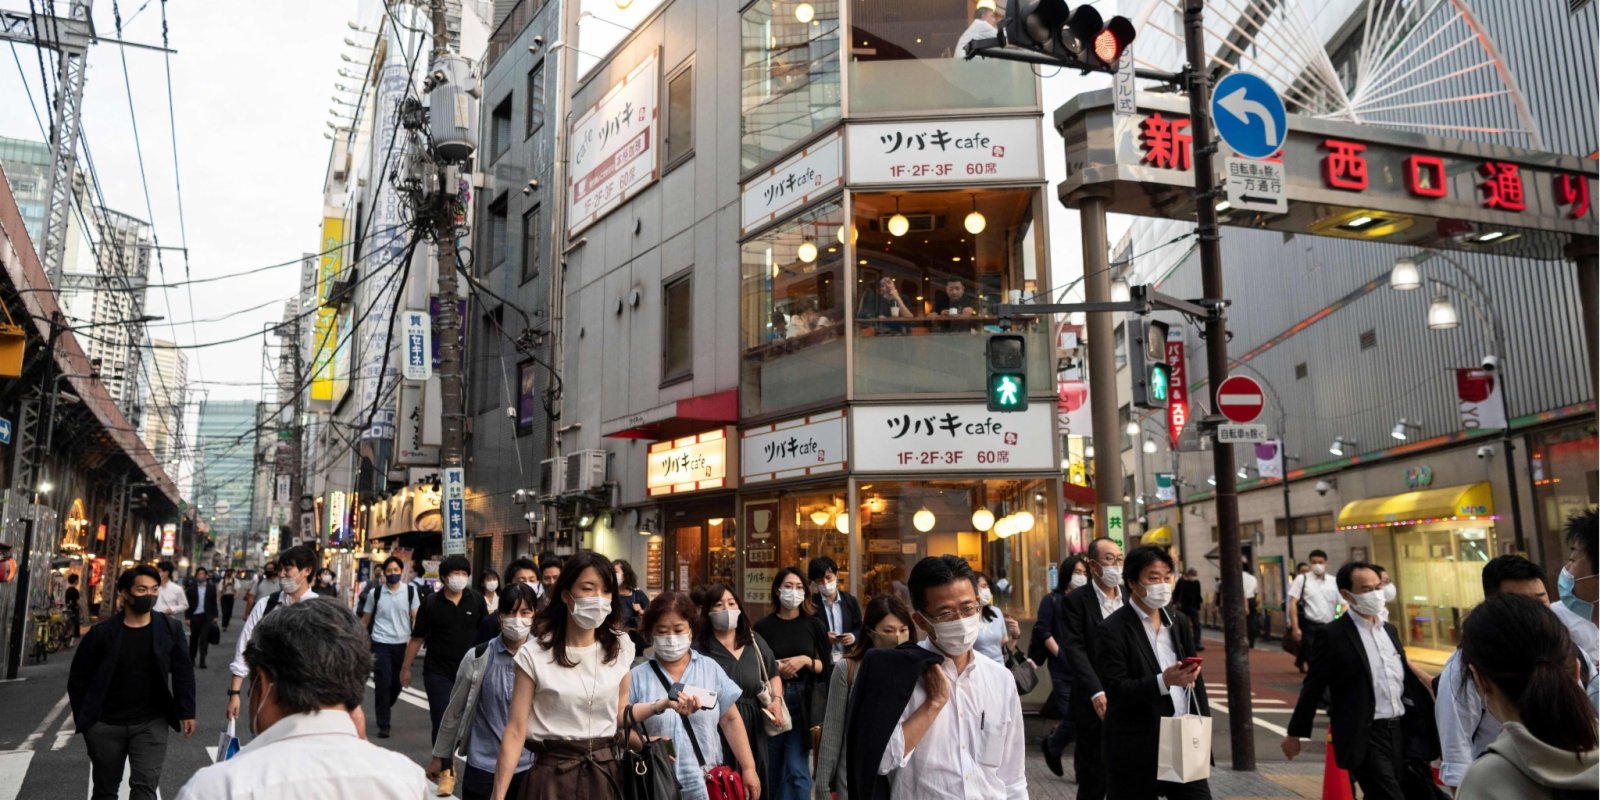 42% of major firms see Japan's economy slowing down on rising prices